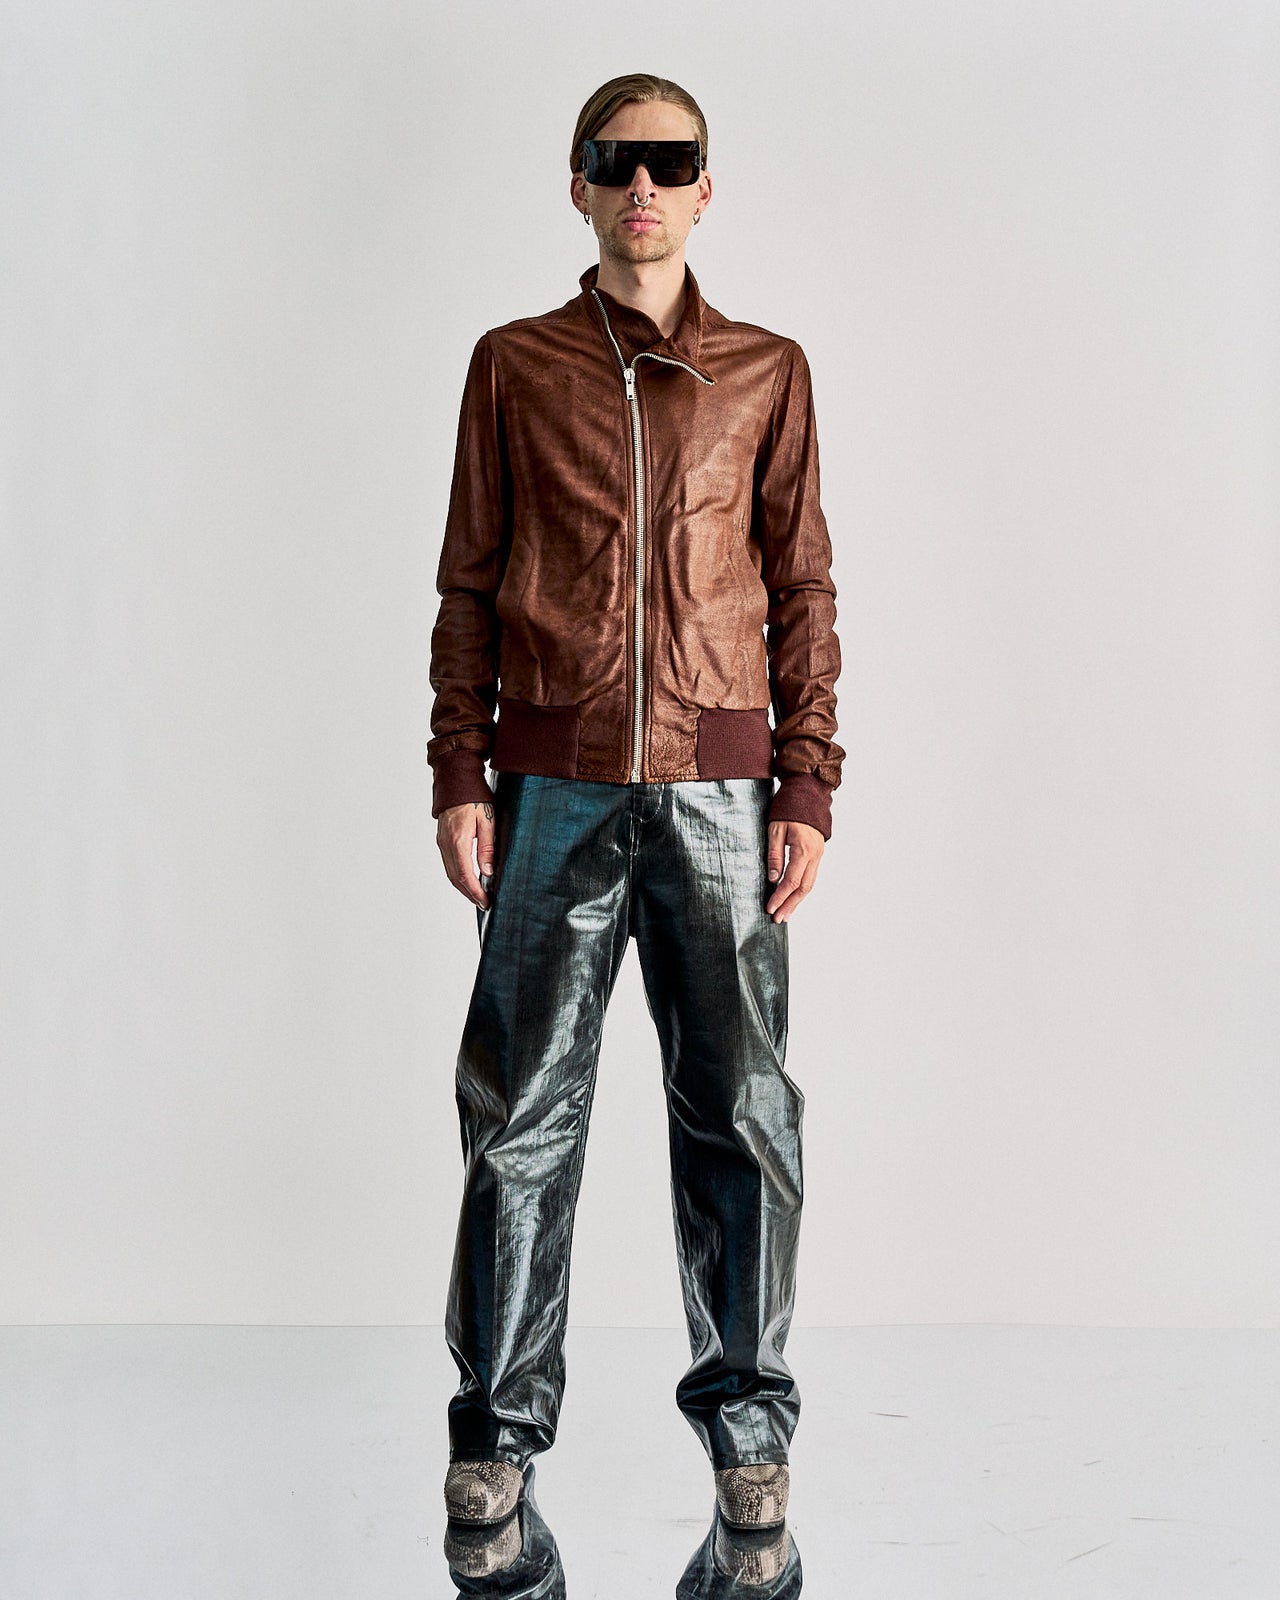 Rick Owens FW 2008 Stag zip bomber leather jacket